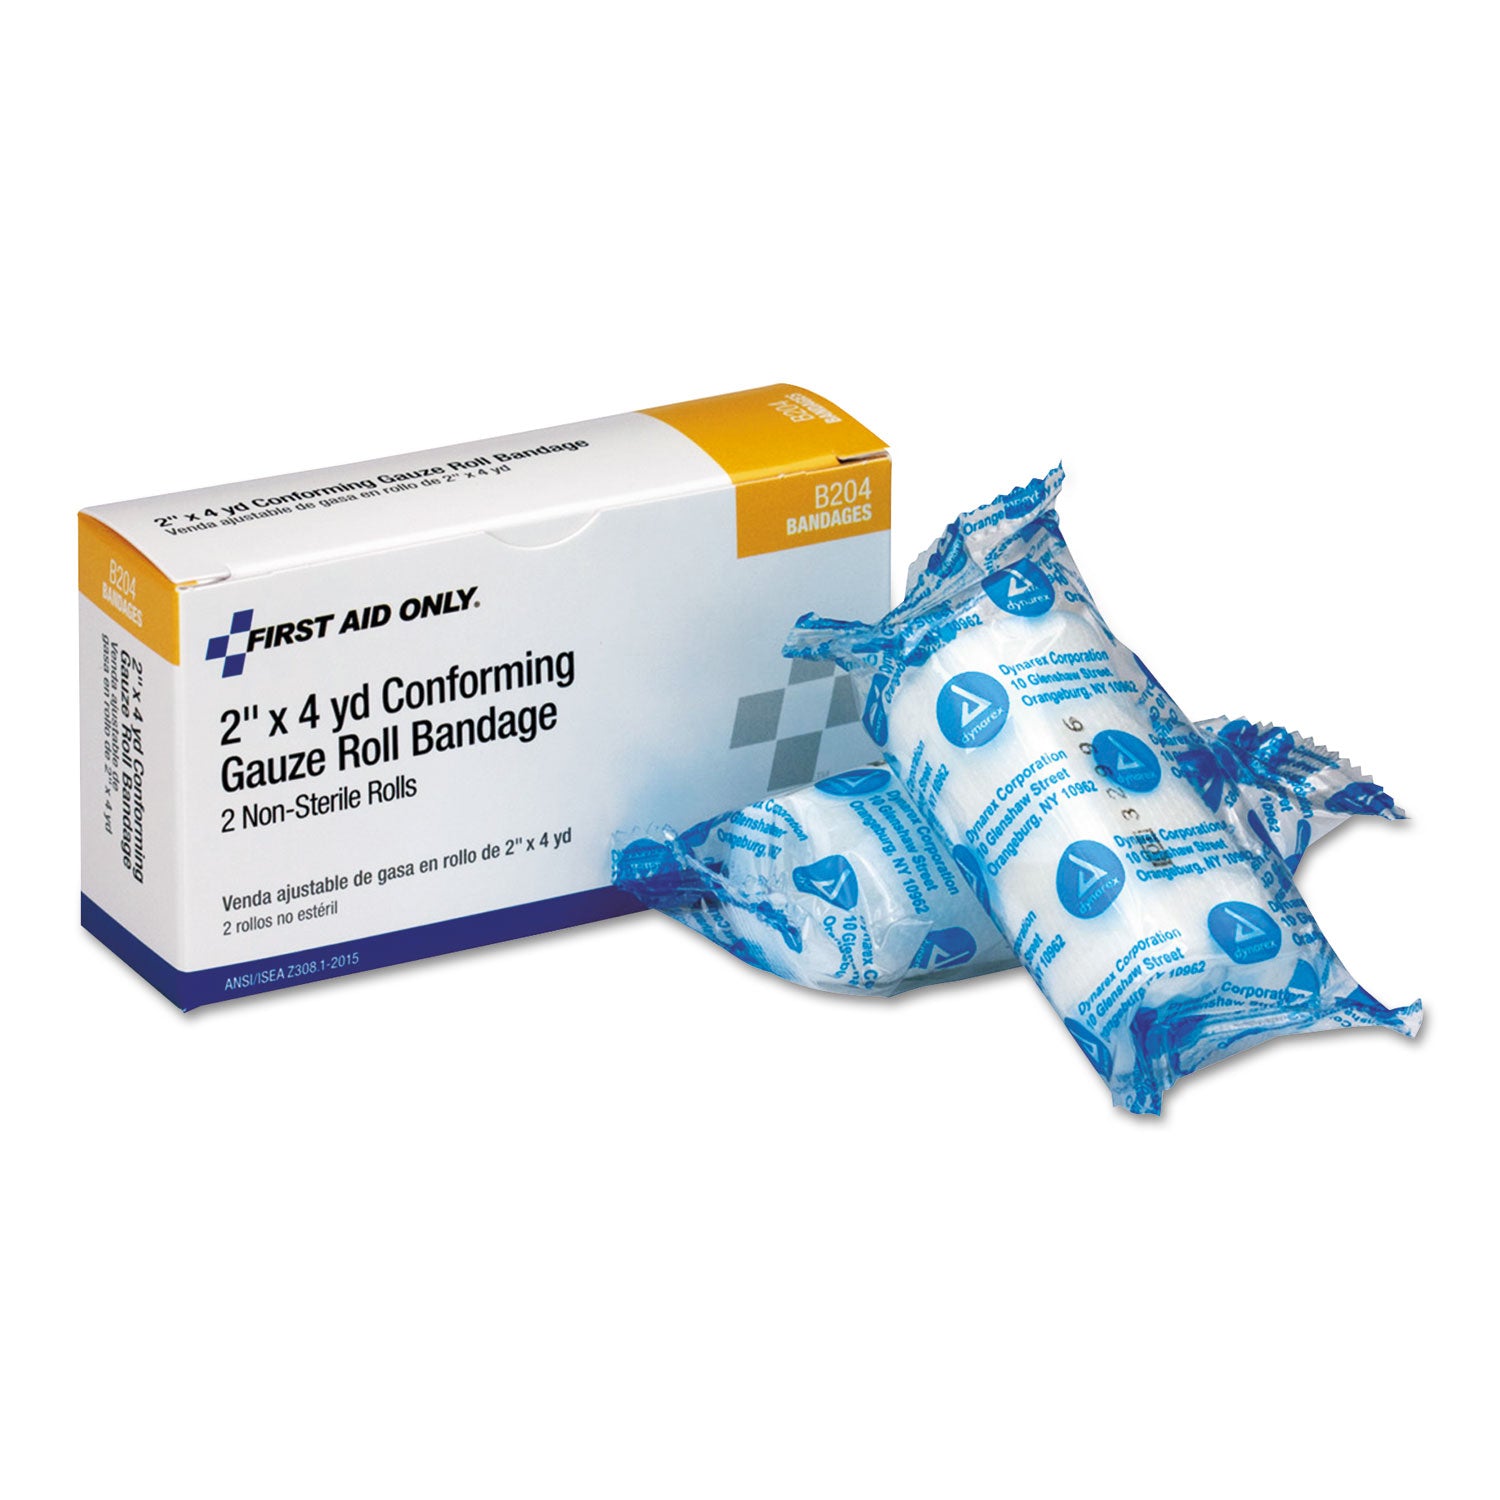 10-person-ansi-class-a-refill-2-conforming-gauze-bandage_faob204 - 1